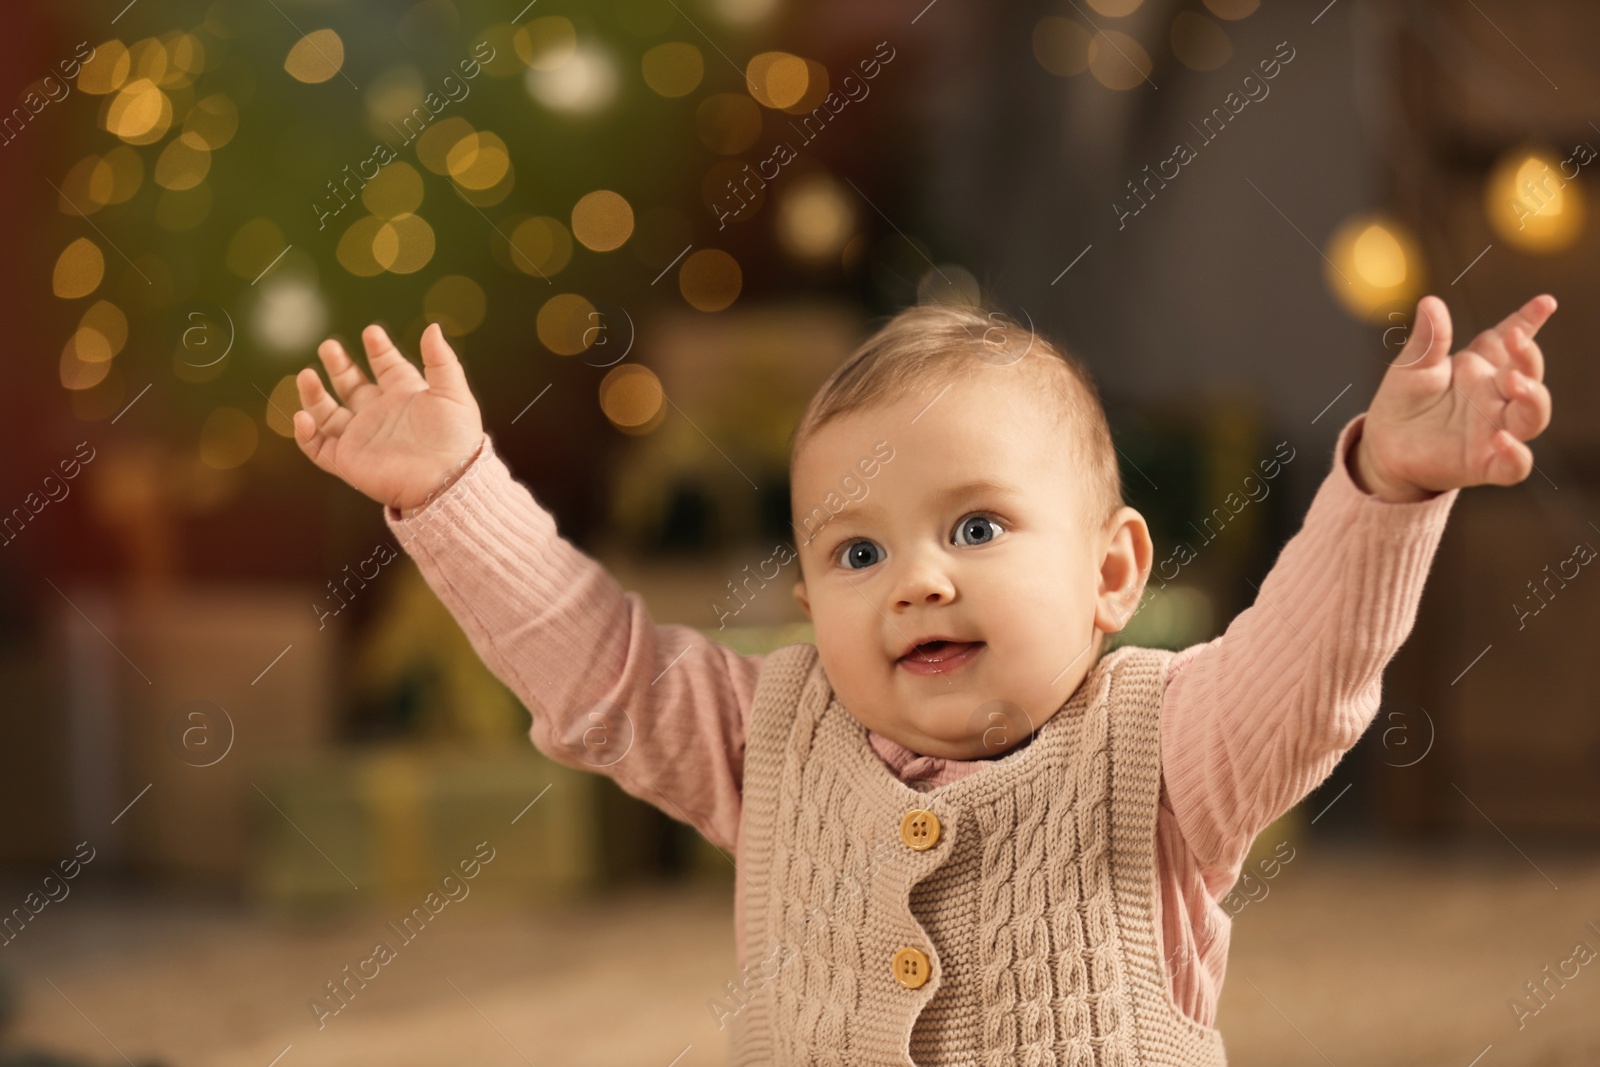 Photo of Cute little baby and blurred Christmas lights on background. Winter holiday